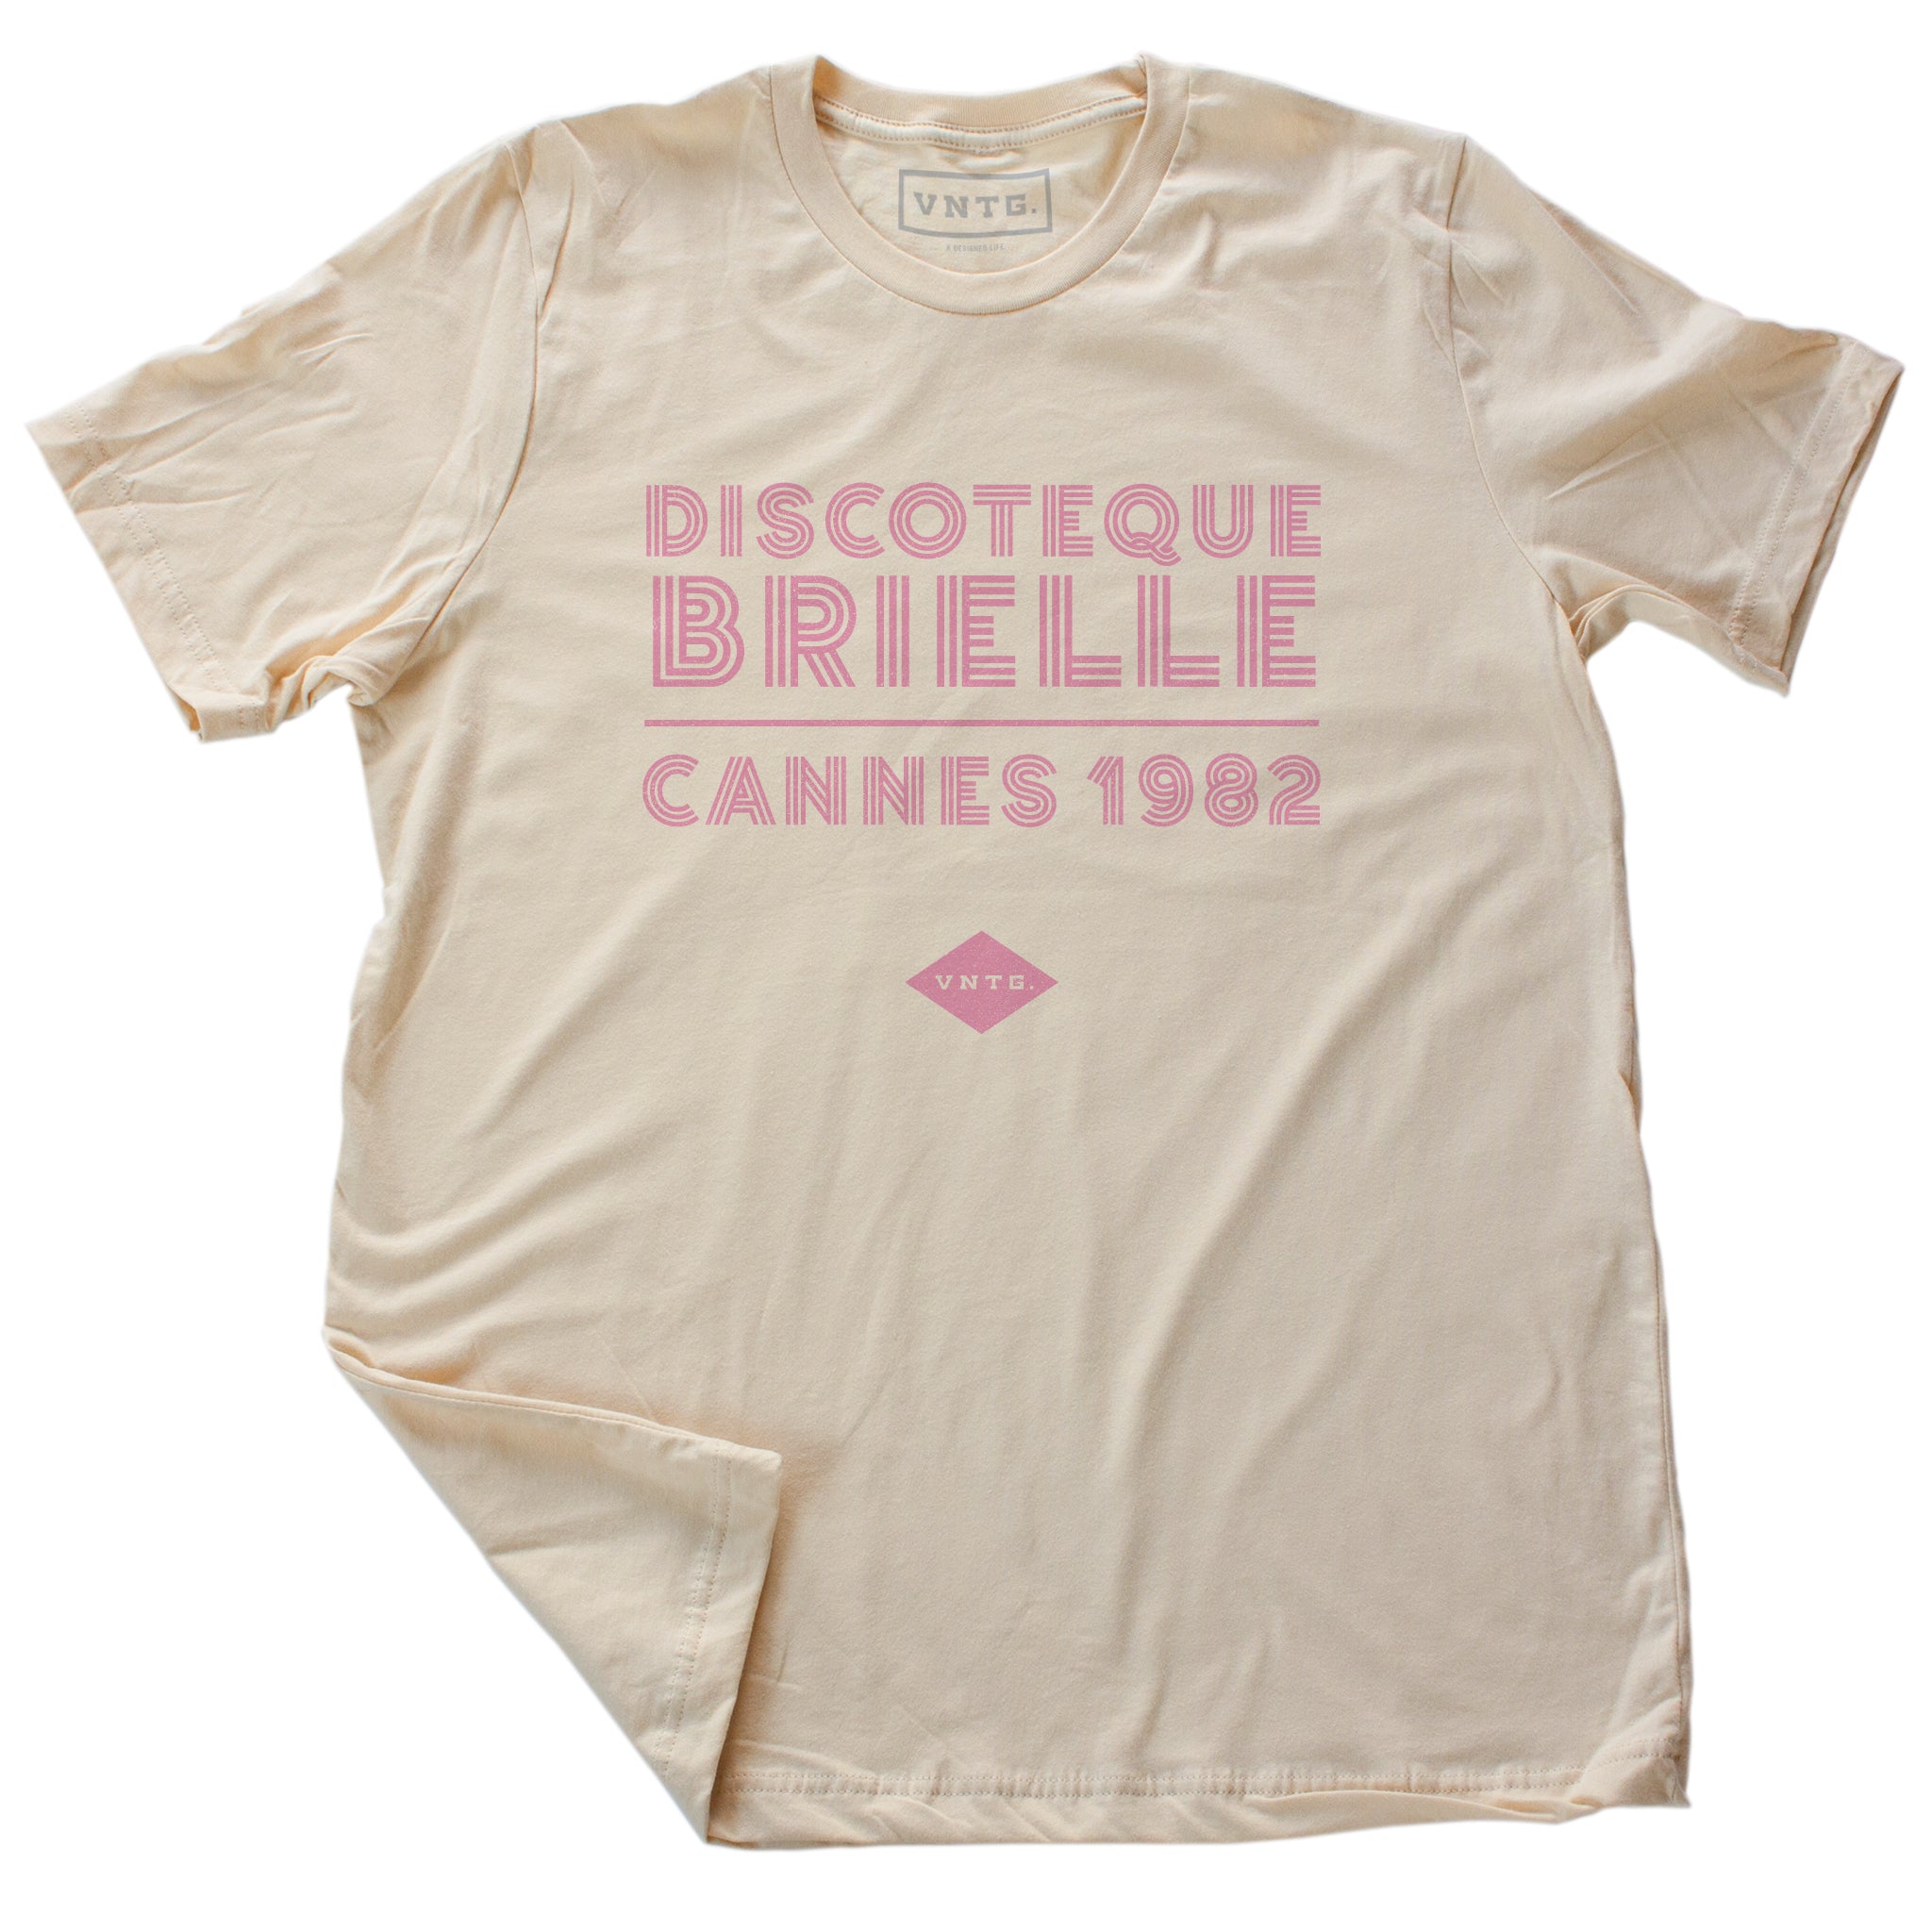 A fashionable classic Soft Cream graphic tee, for a fictional Cannes, France disco from 1982. The retro typography reads “DISCOTEQUE BRIELLE / CANNES 1982” with the VNTG. diamond logo beneath. From Wolfsaint.net